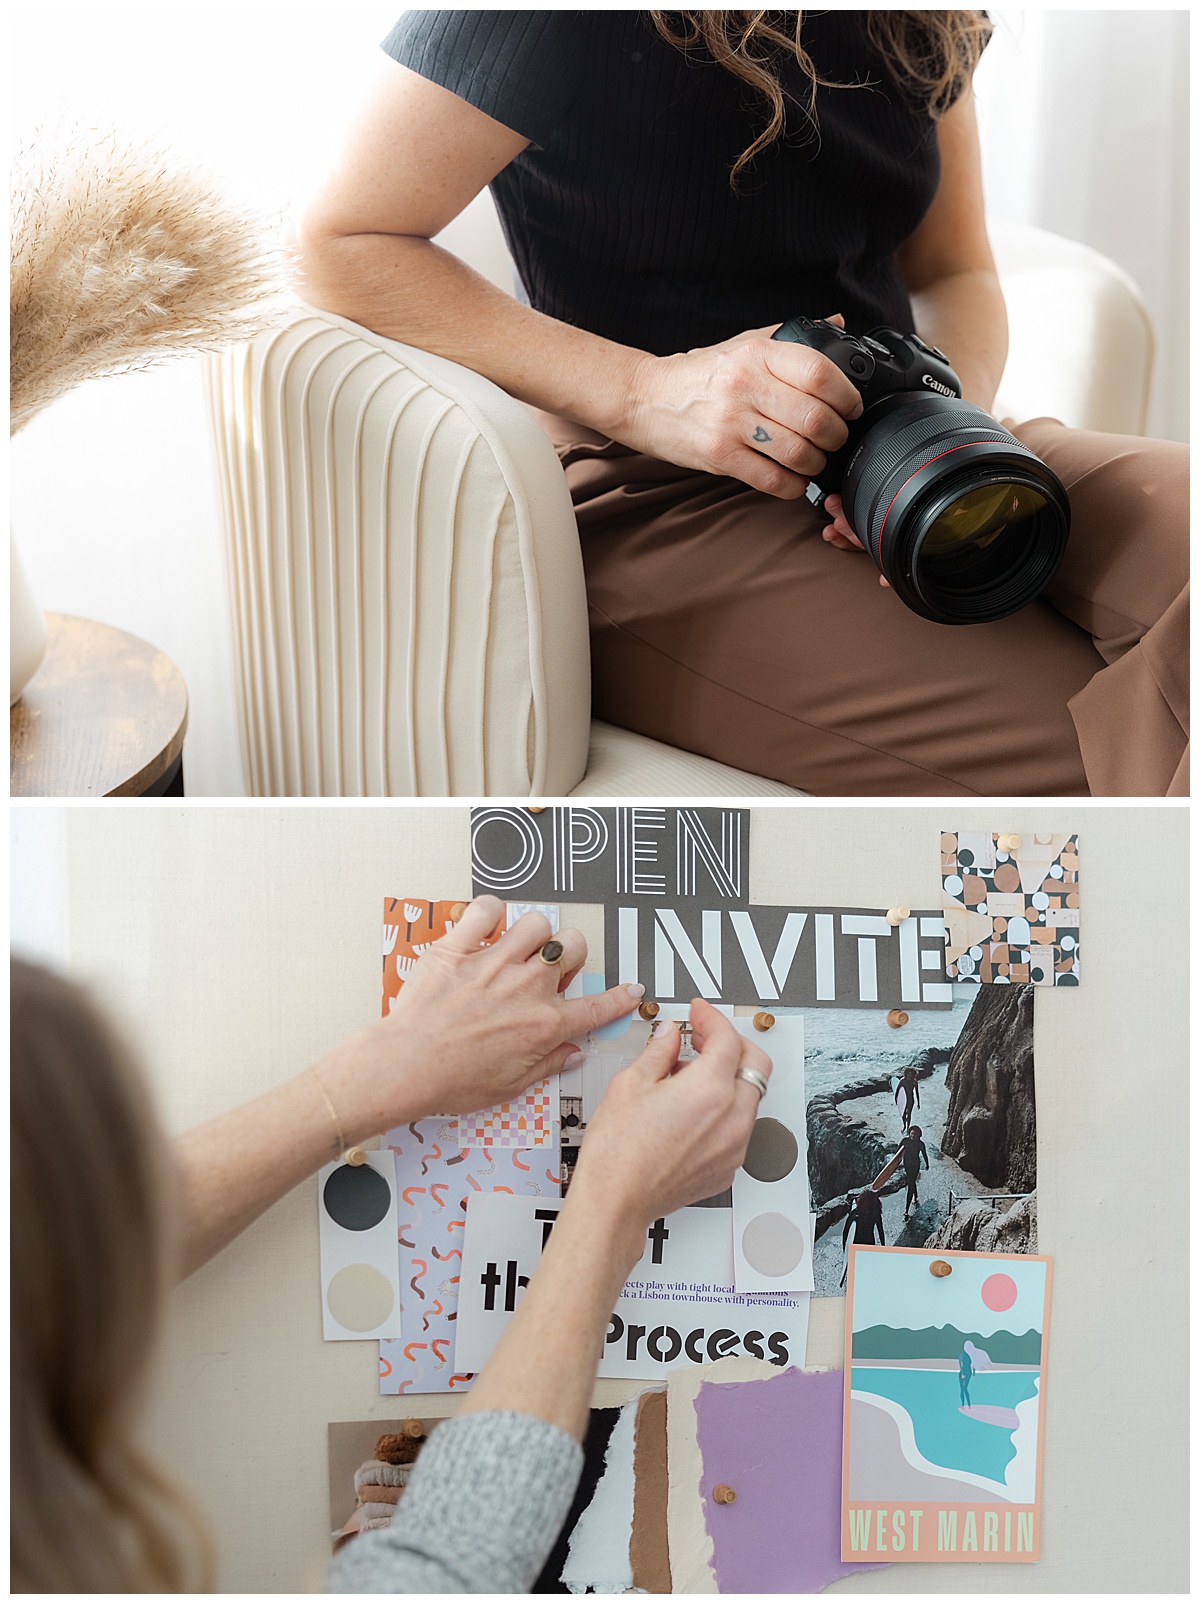 Fun details during brand photoshoot by San Francisco brand photographer